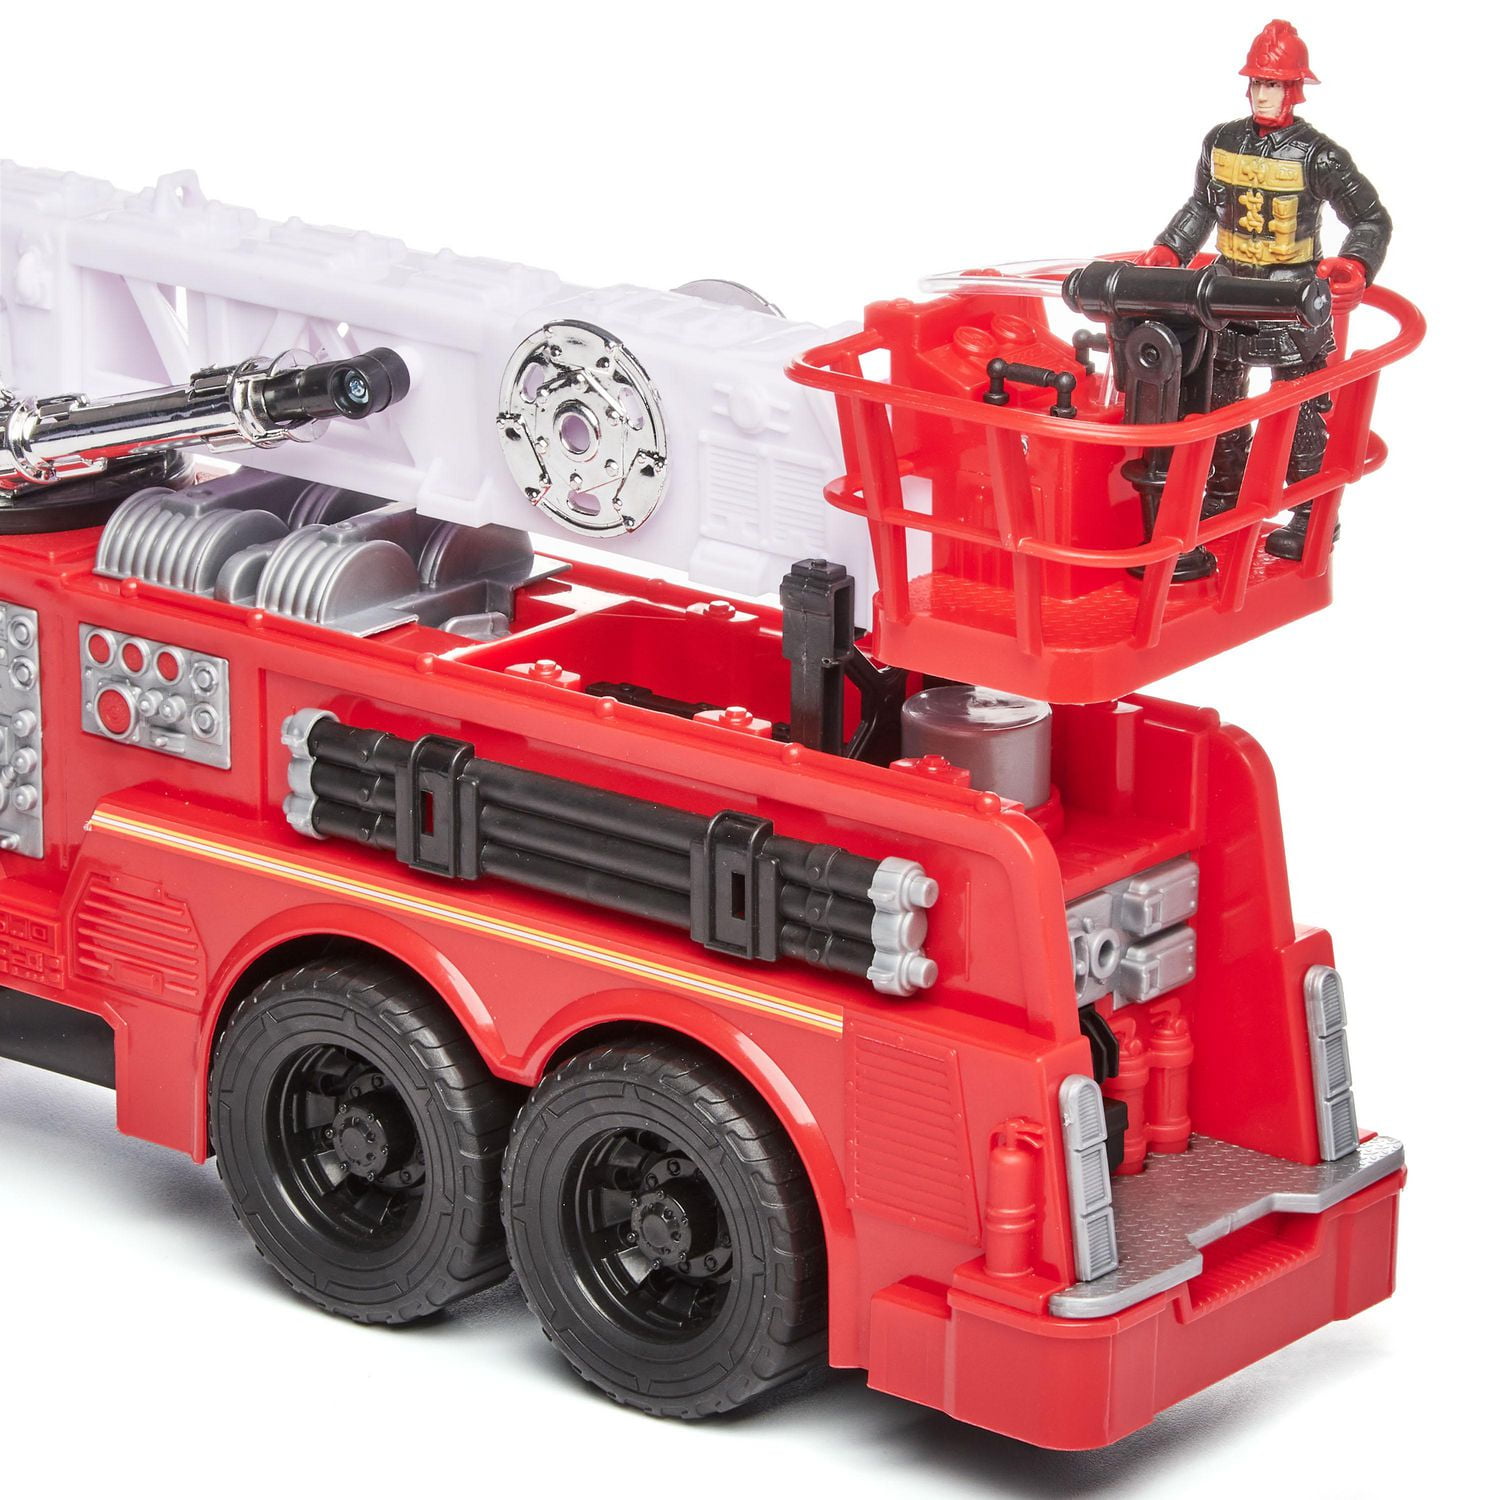 Kid Connection Fire Truck Play Set, 10 Pieces, Light & Sound